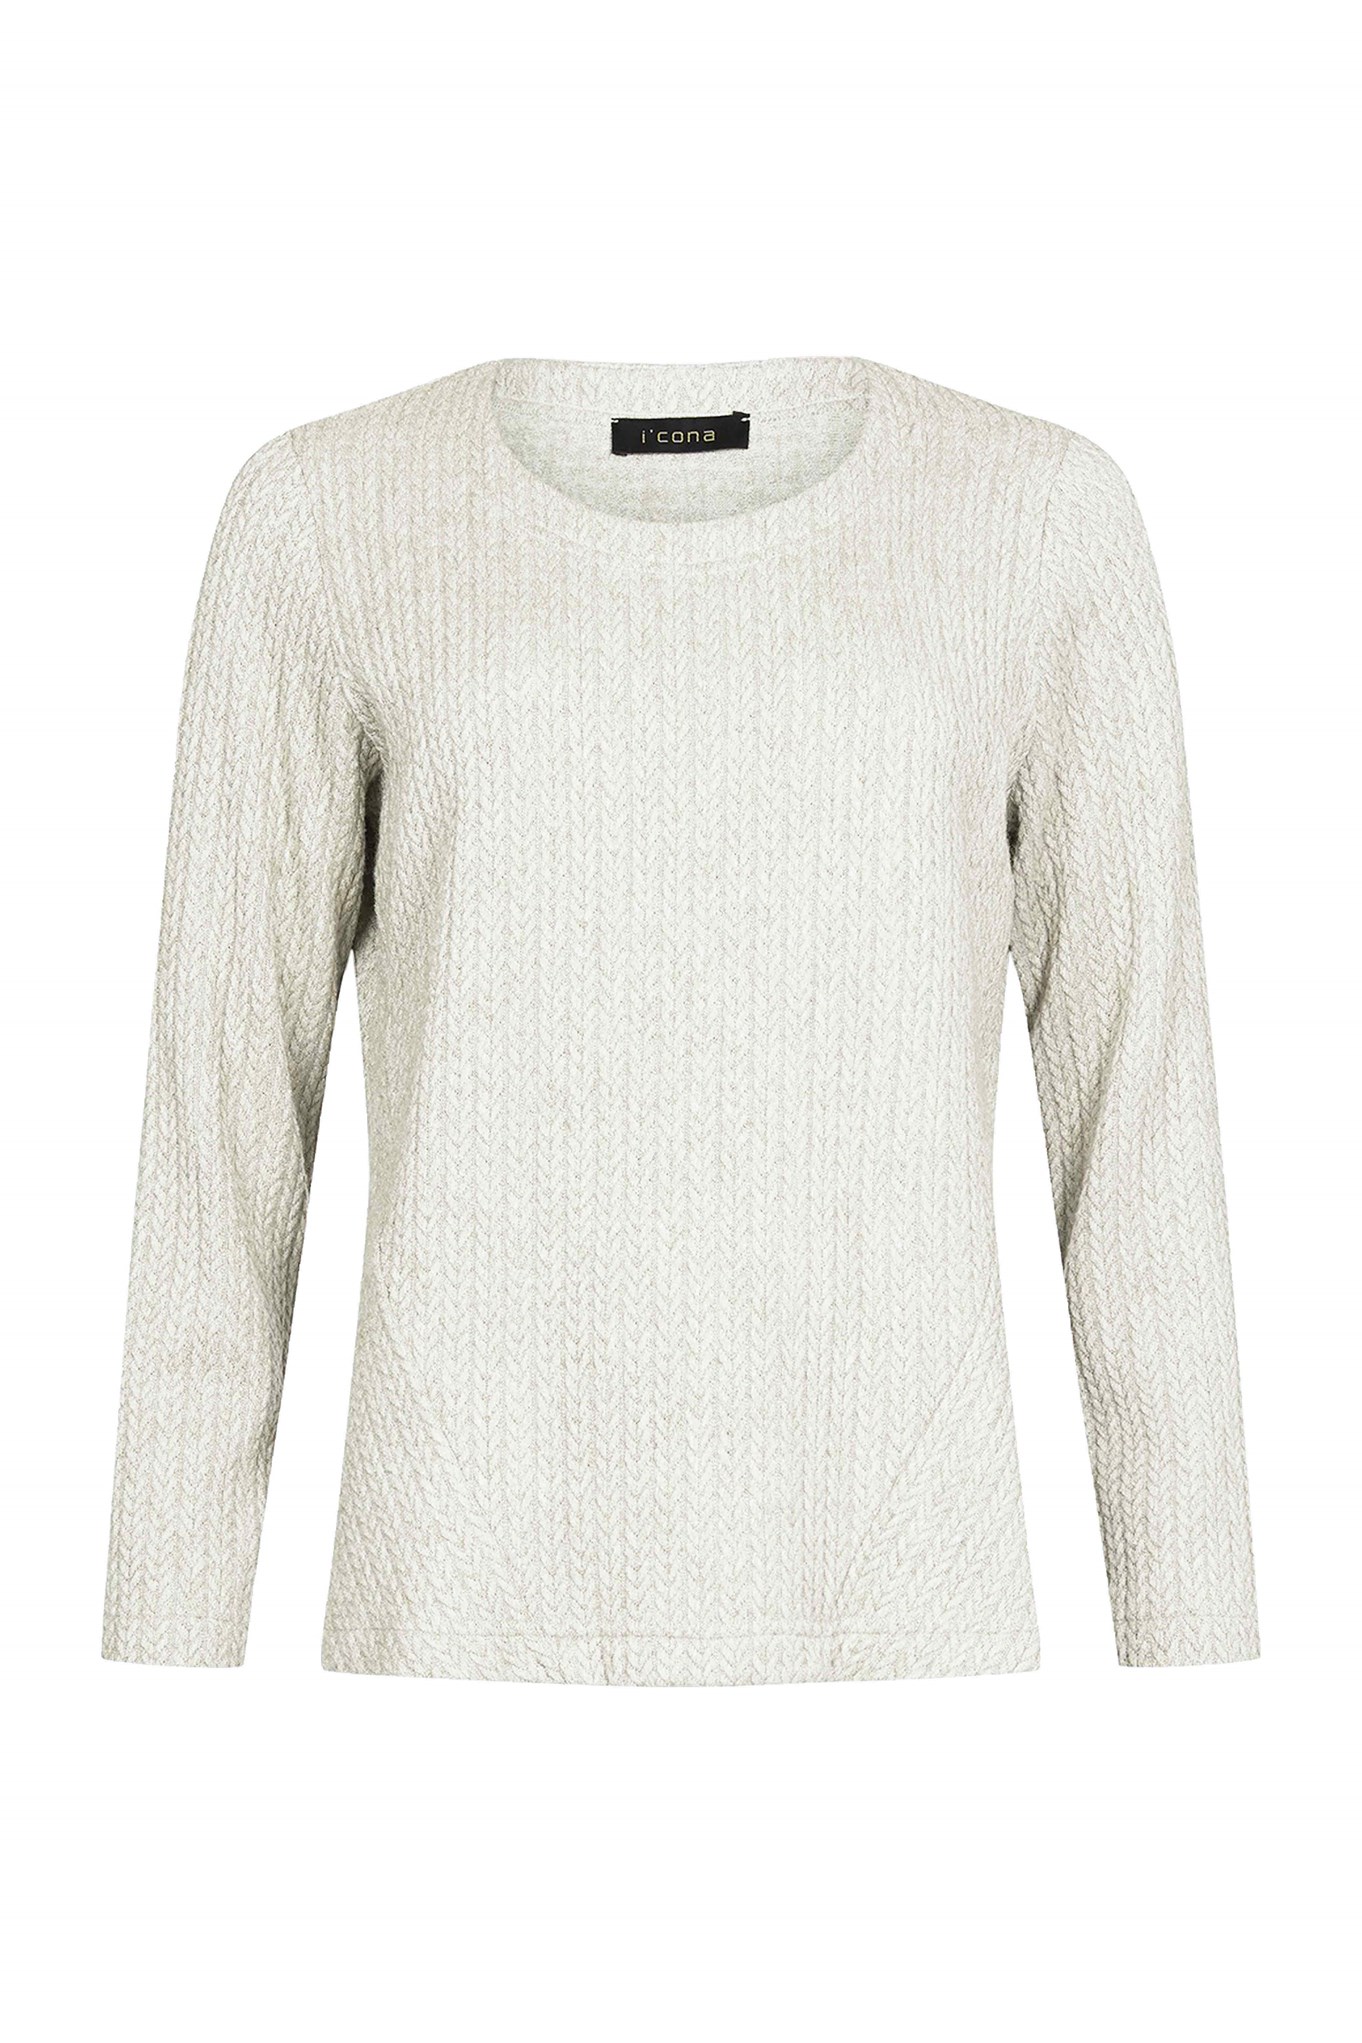 I'cona Luxe Cable Knit Jumper in Soft White